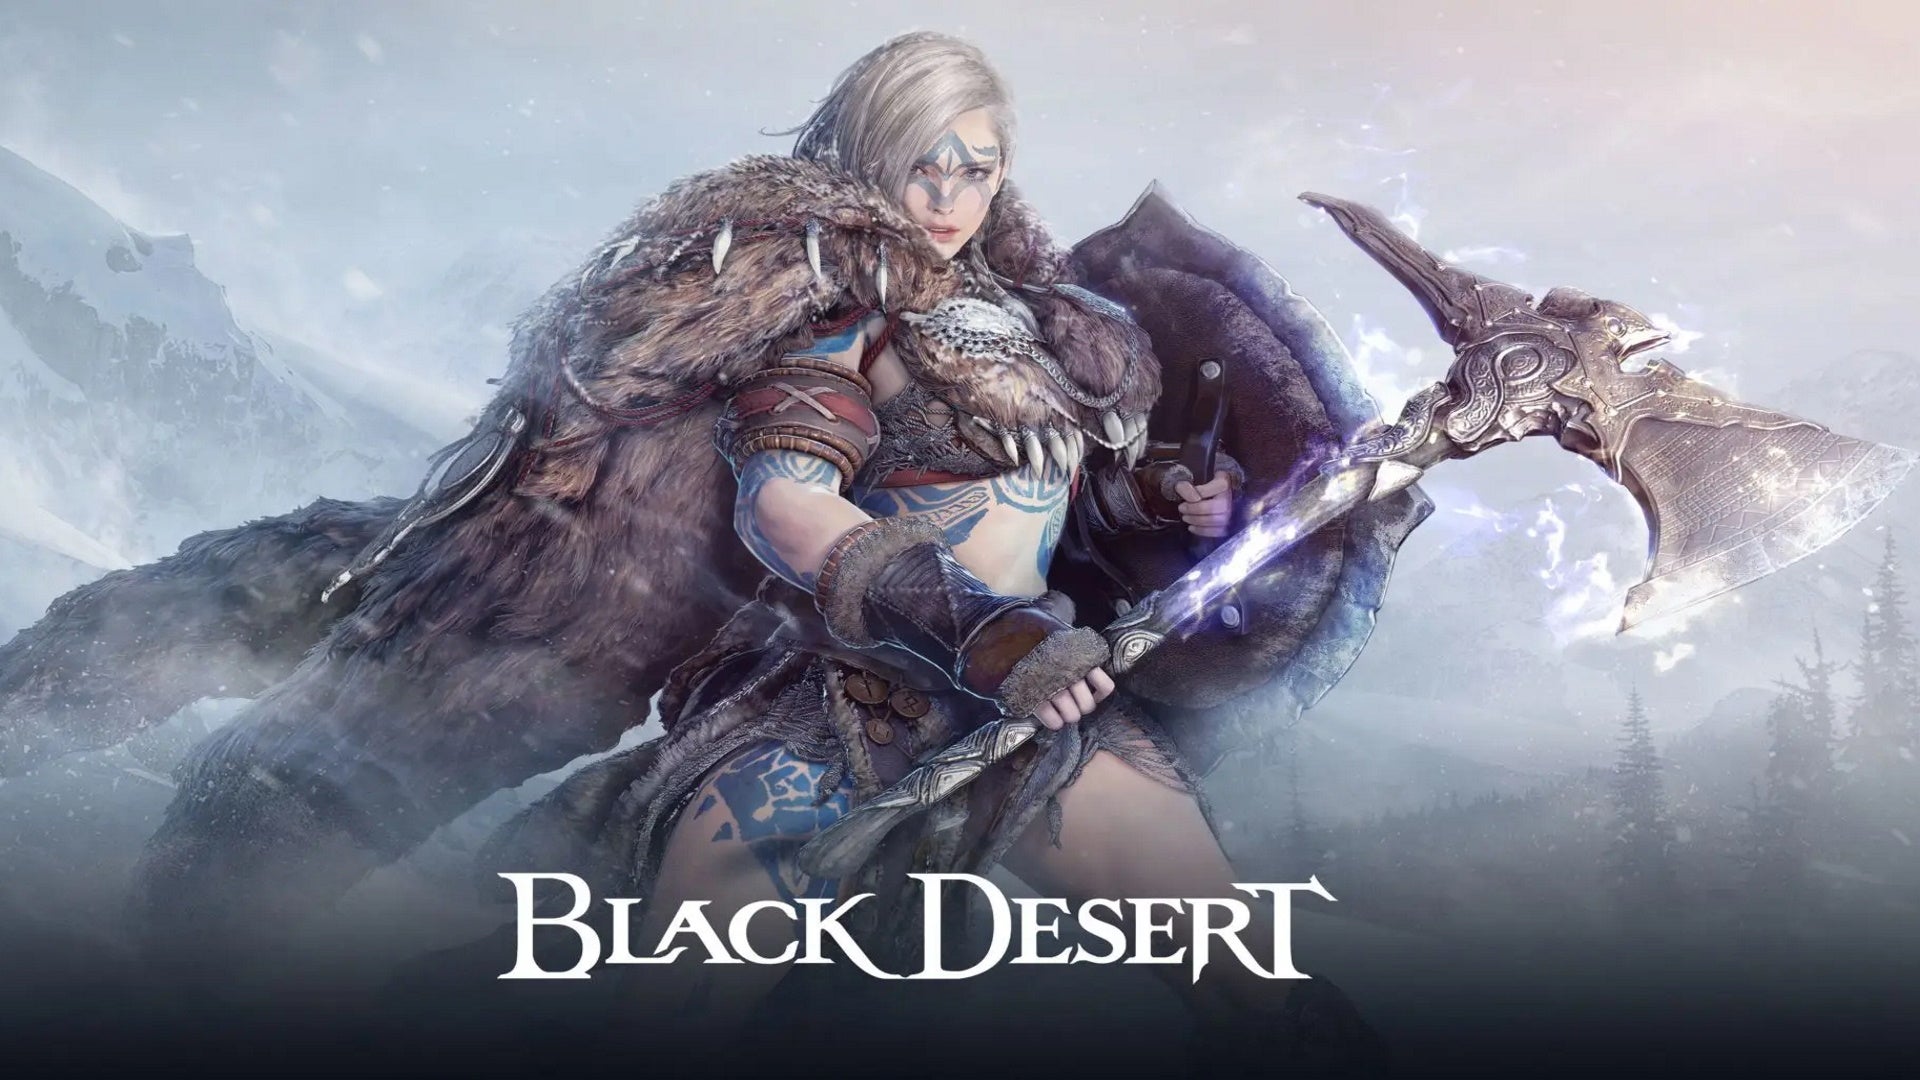 Image for Black Desert codes for free Cron Stones, Valks, accessories, and more